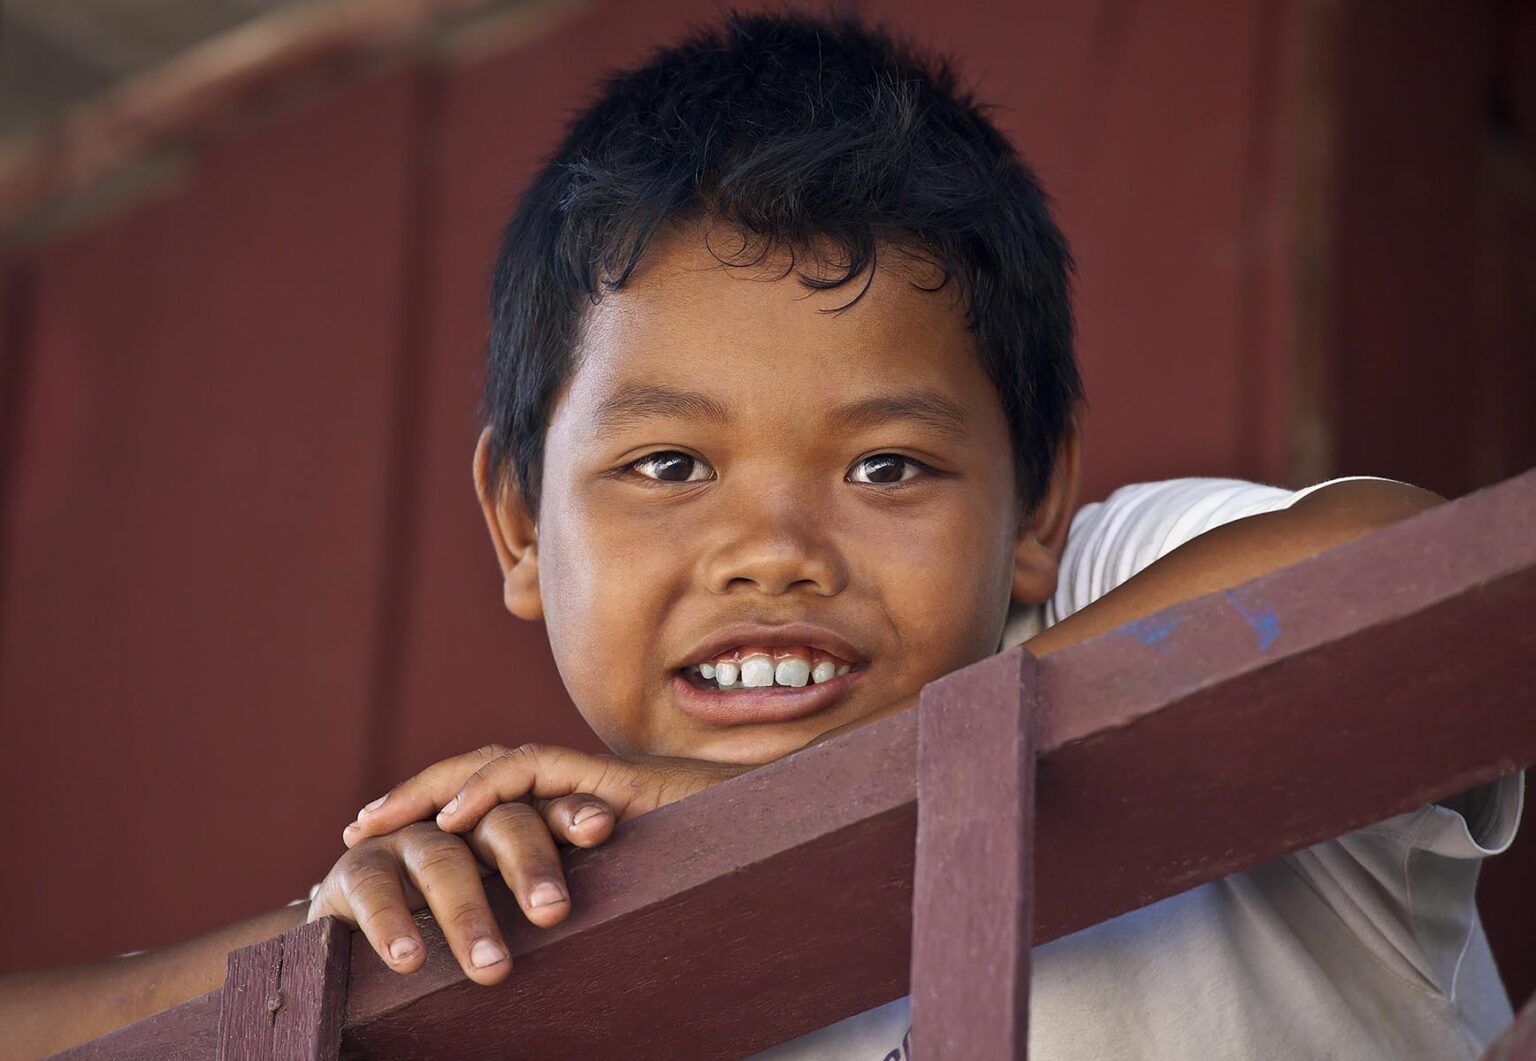 A young man in a village on KOH PHRA THONG ISLAND located in the Andaman Sea - THAILAND